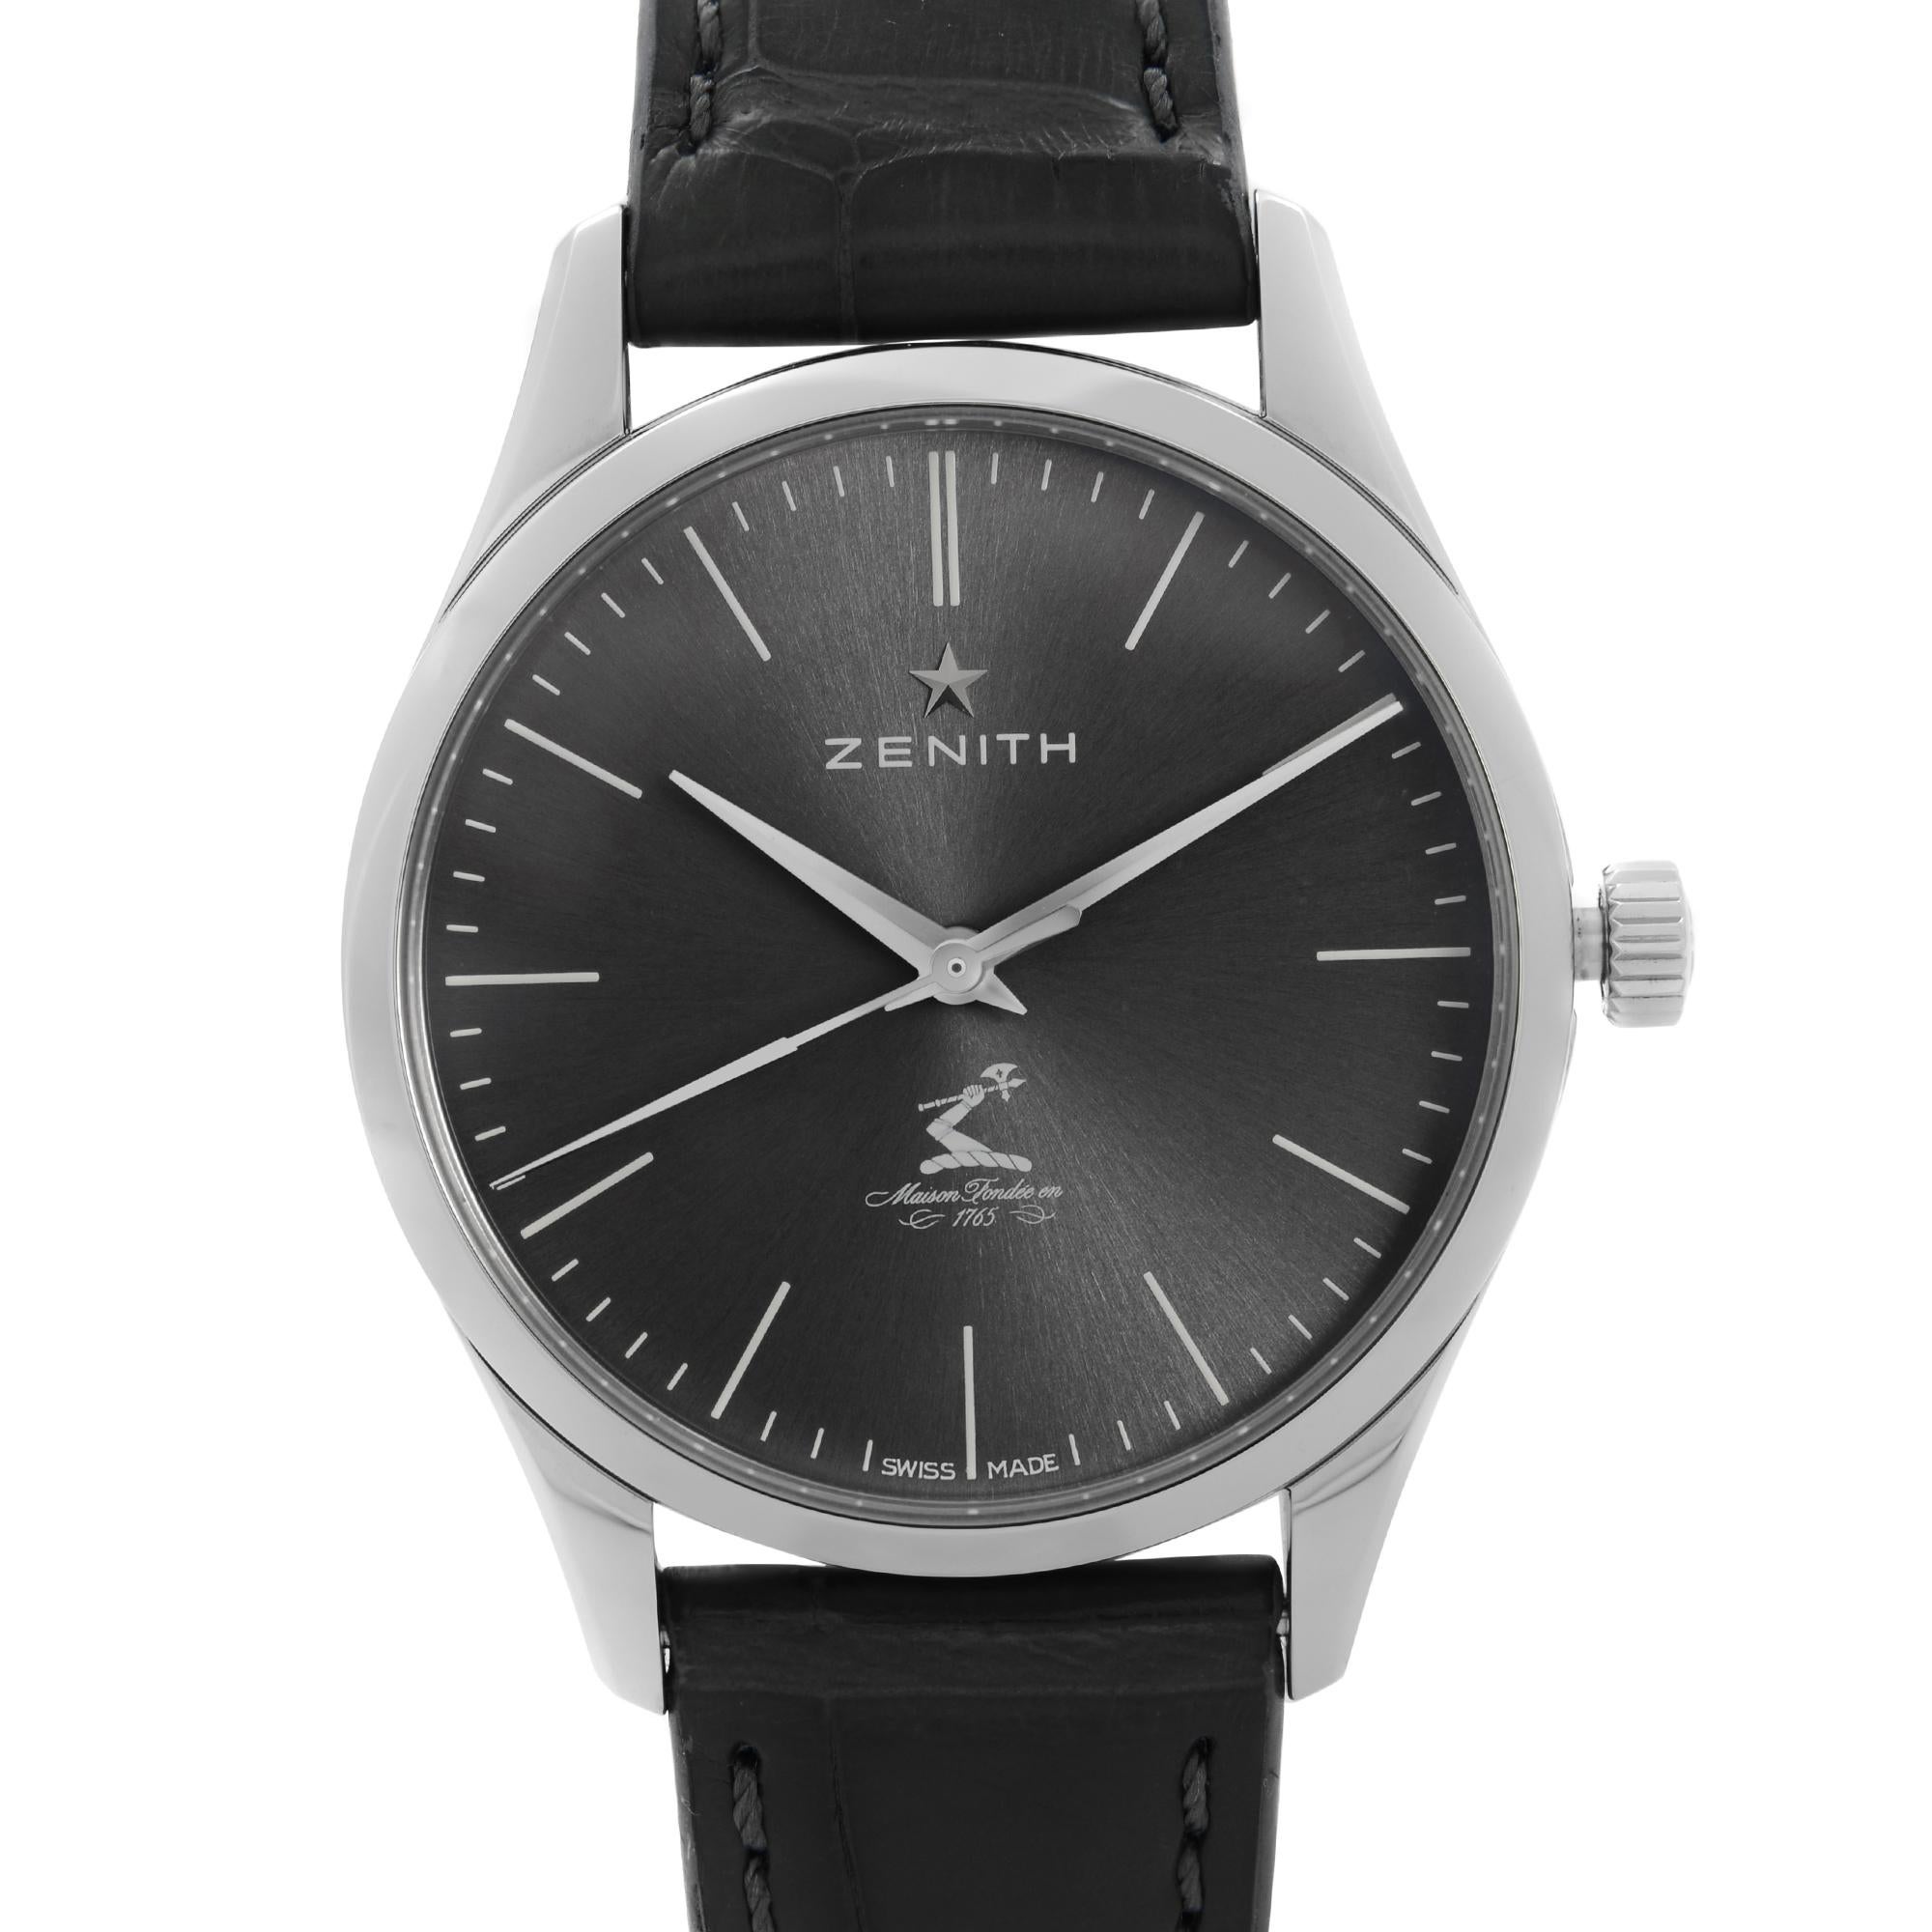 Display Model Zenith Elite Ultra Thin Hennessy 250 Years Limited Edition Gray Dial Automatic Midsize Watch 03.2311.679/27.C760. This Beautiful Timepiece is Powered by Mechanical (Automatic) Movement And Features: Round Stainless Steel Case with a